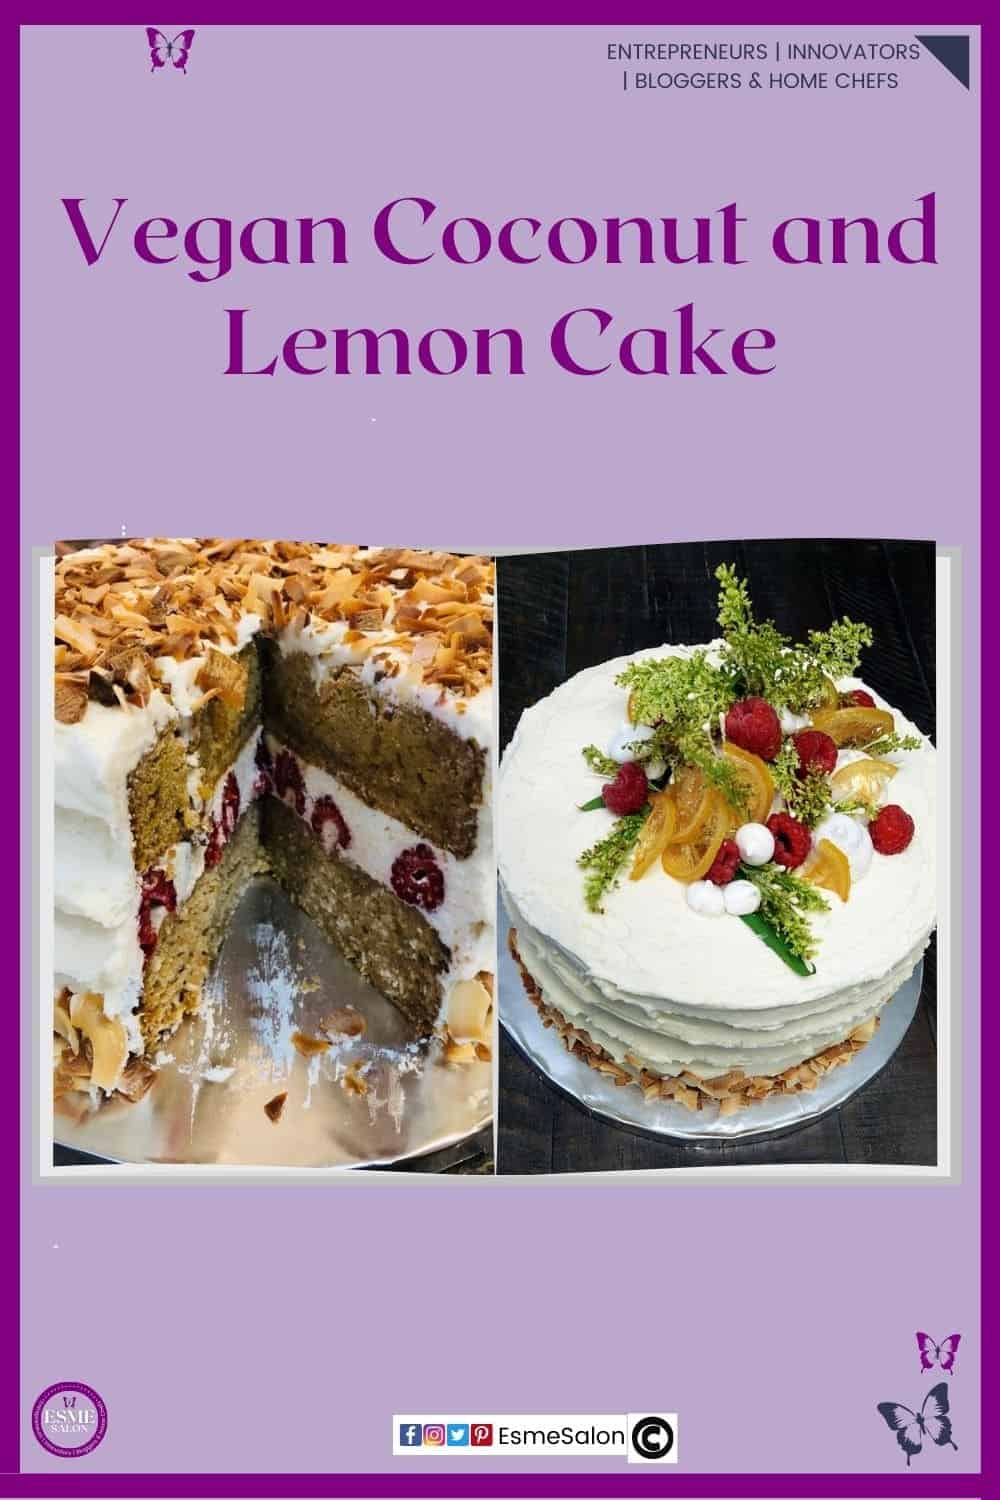 an image of a Vegan Coconut and Lemon Cake sliced with vegan filling and berries and topped with toasted coconut. The full cake topped with fresh berries and candied orange slices